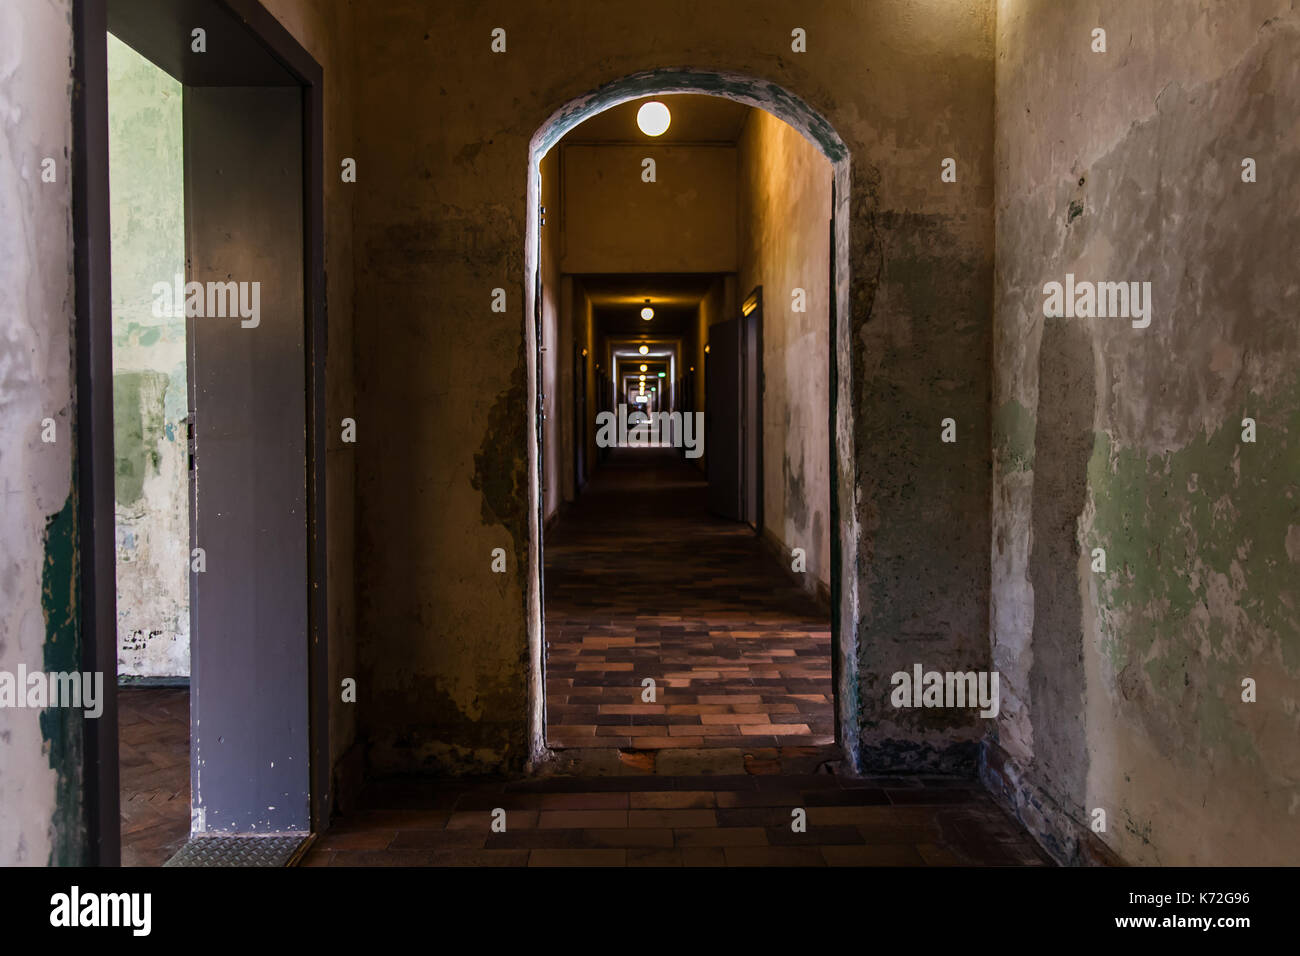 The Bunker, a camp prison, Dachau Concentration Camp Memorial Site Stock Photo